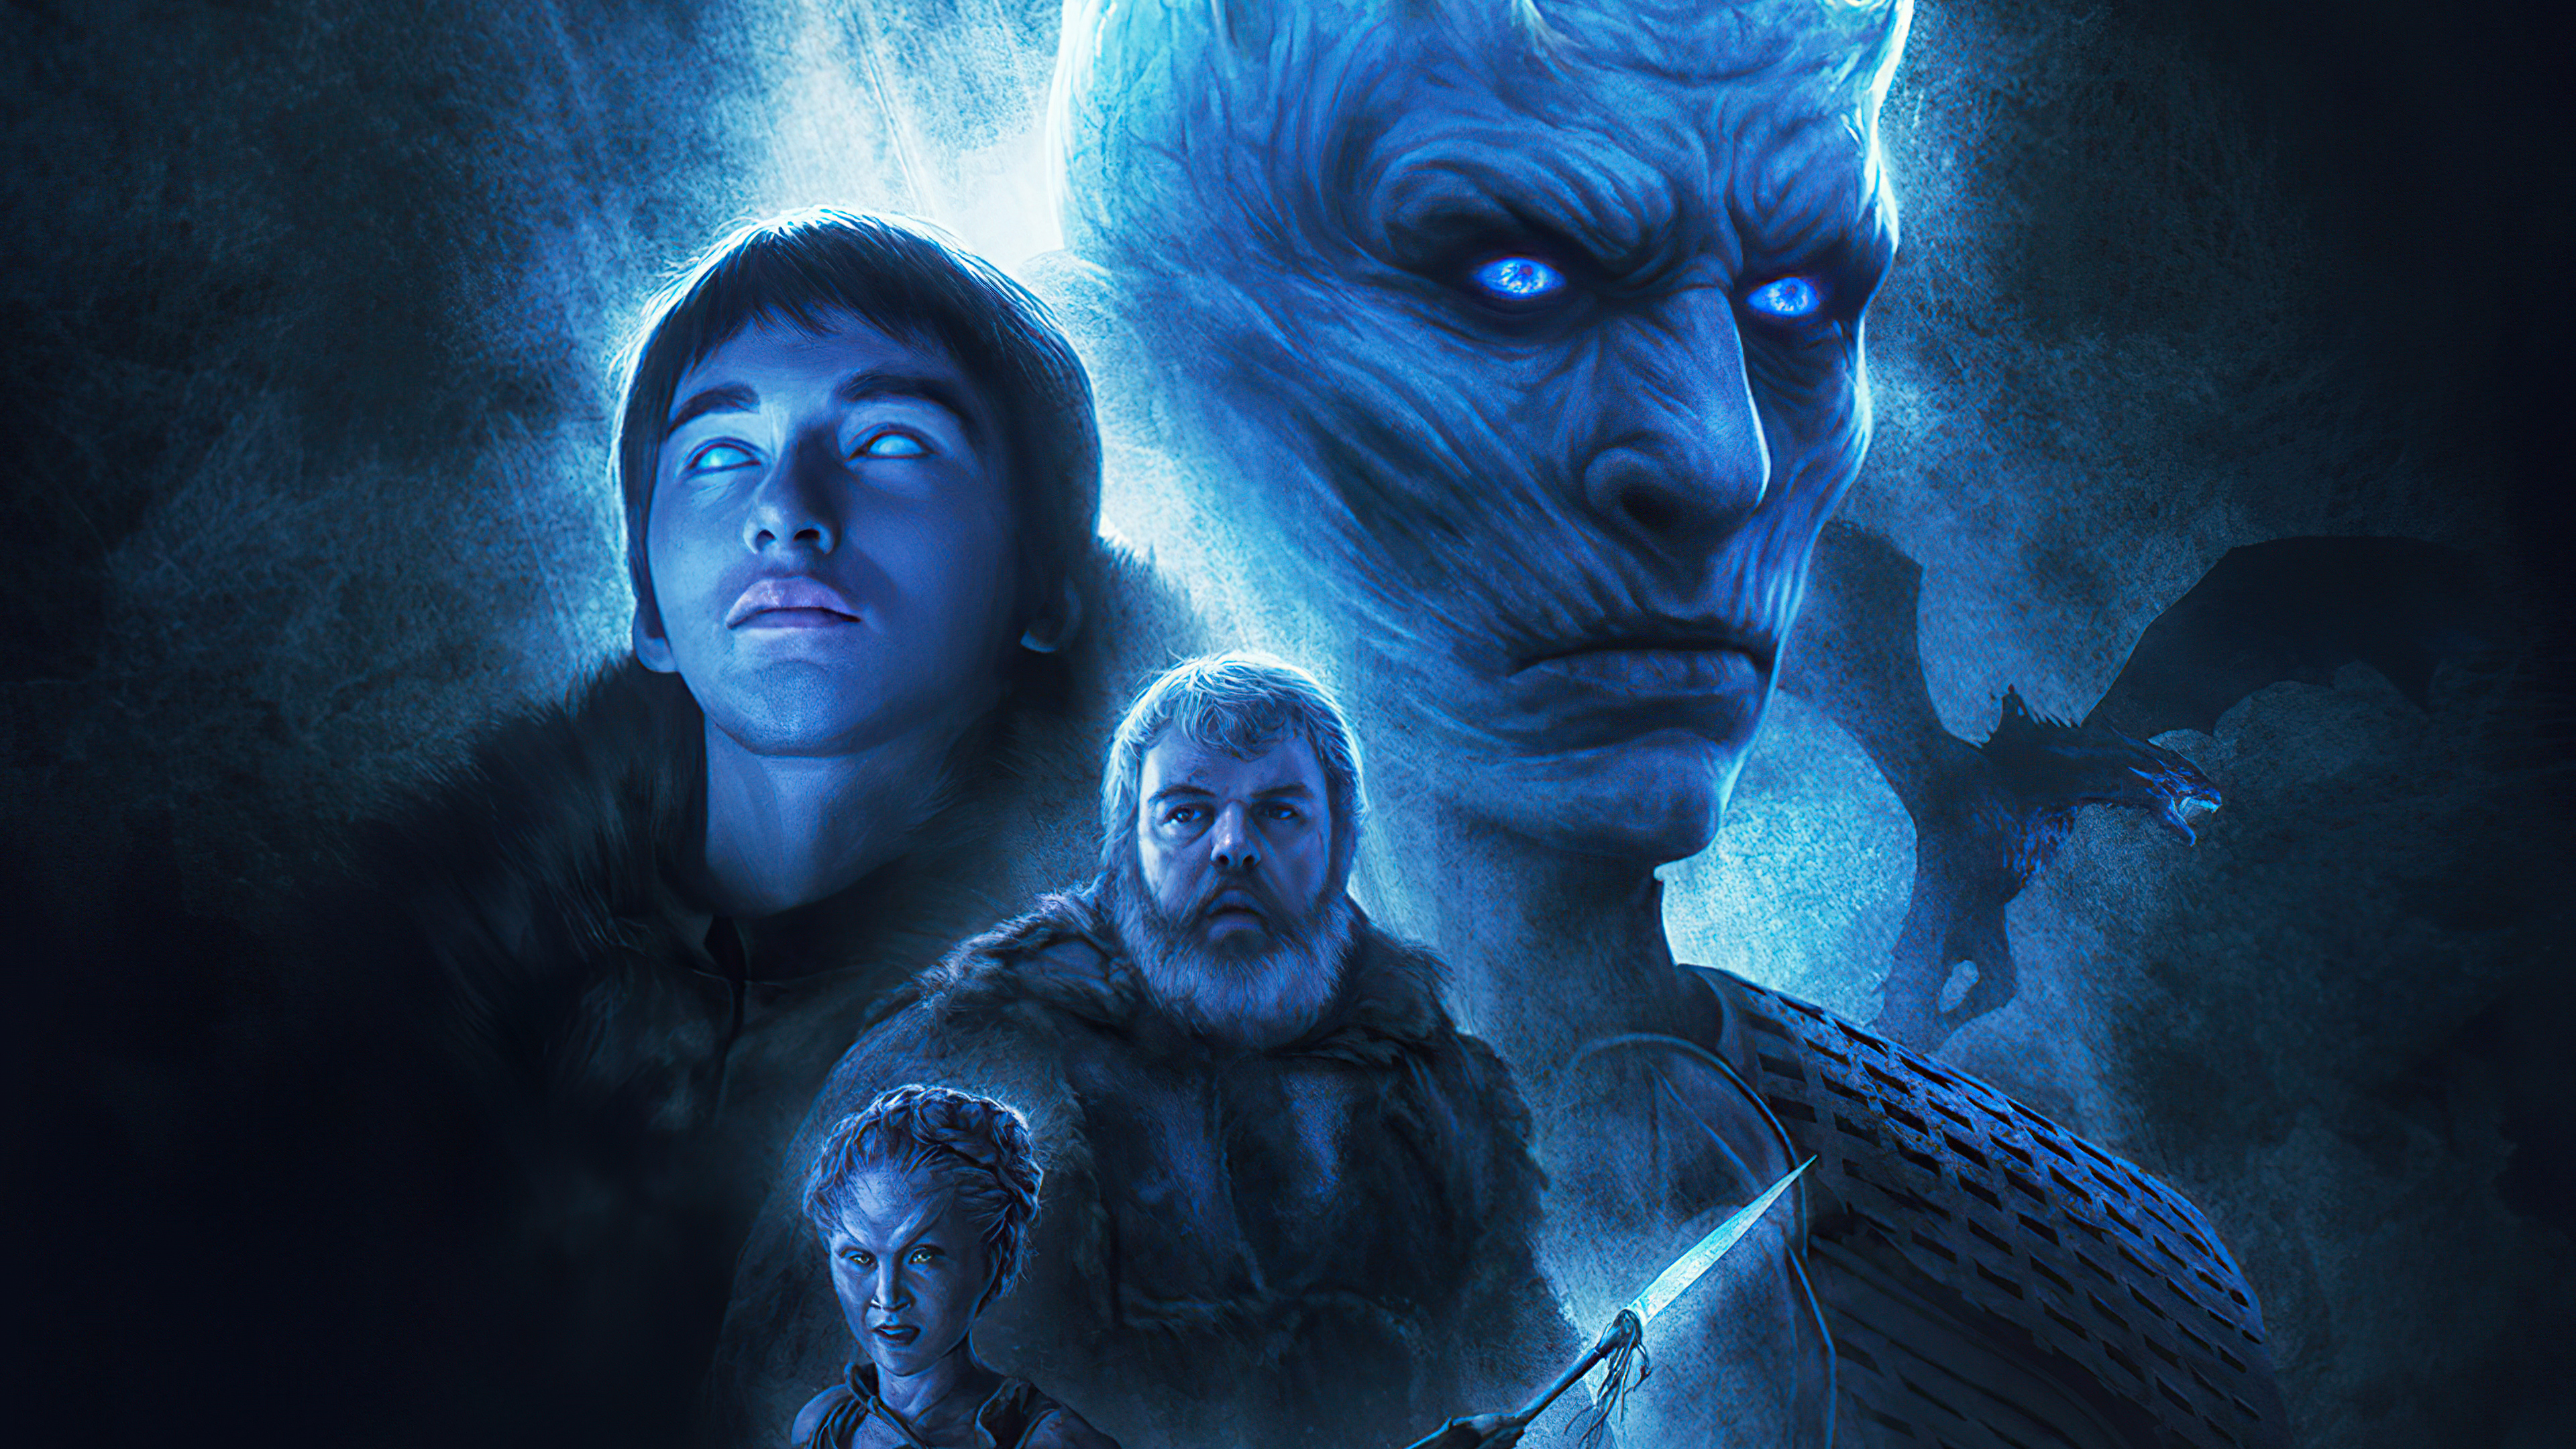 Wallpapers Game Of Thrones Night King TV show on the desktop